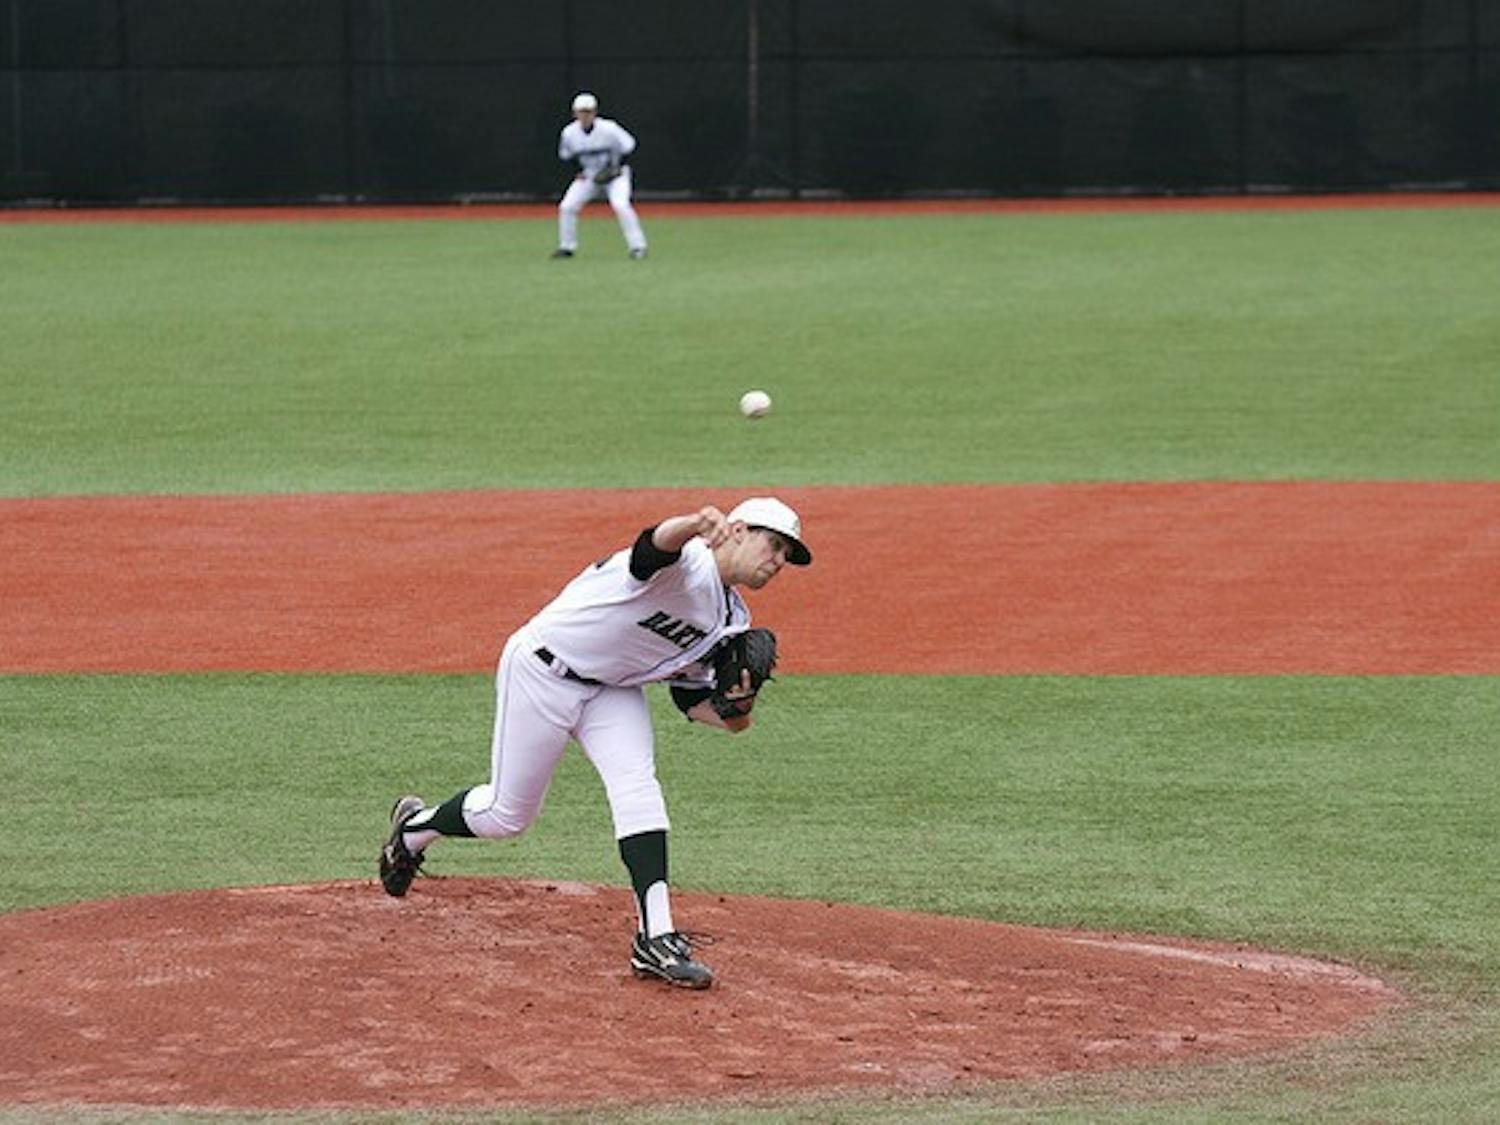 Dartmouth starter Louis Concato '14 gave up two runs in four innings of work in the Big Green's 13-6 win over the University of Hartford on Tuesday.